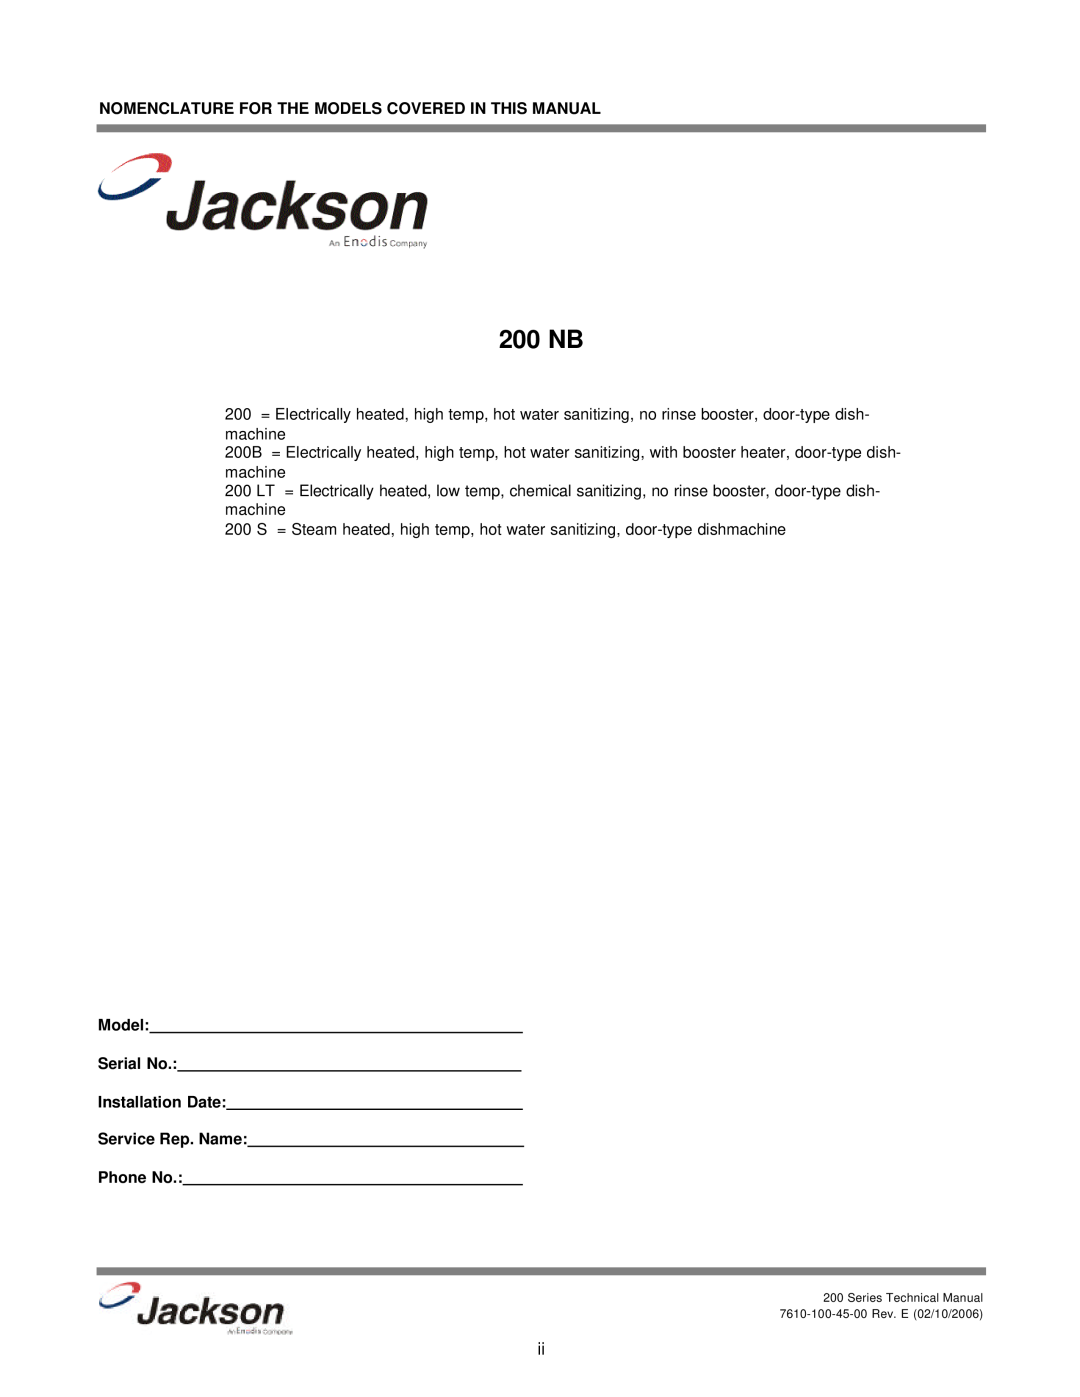 Jackson 200S, 200LT, 200B technical manual Nomenclature For The Models Covered In This Manual, 200 NB 